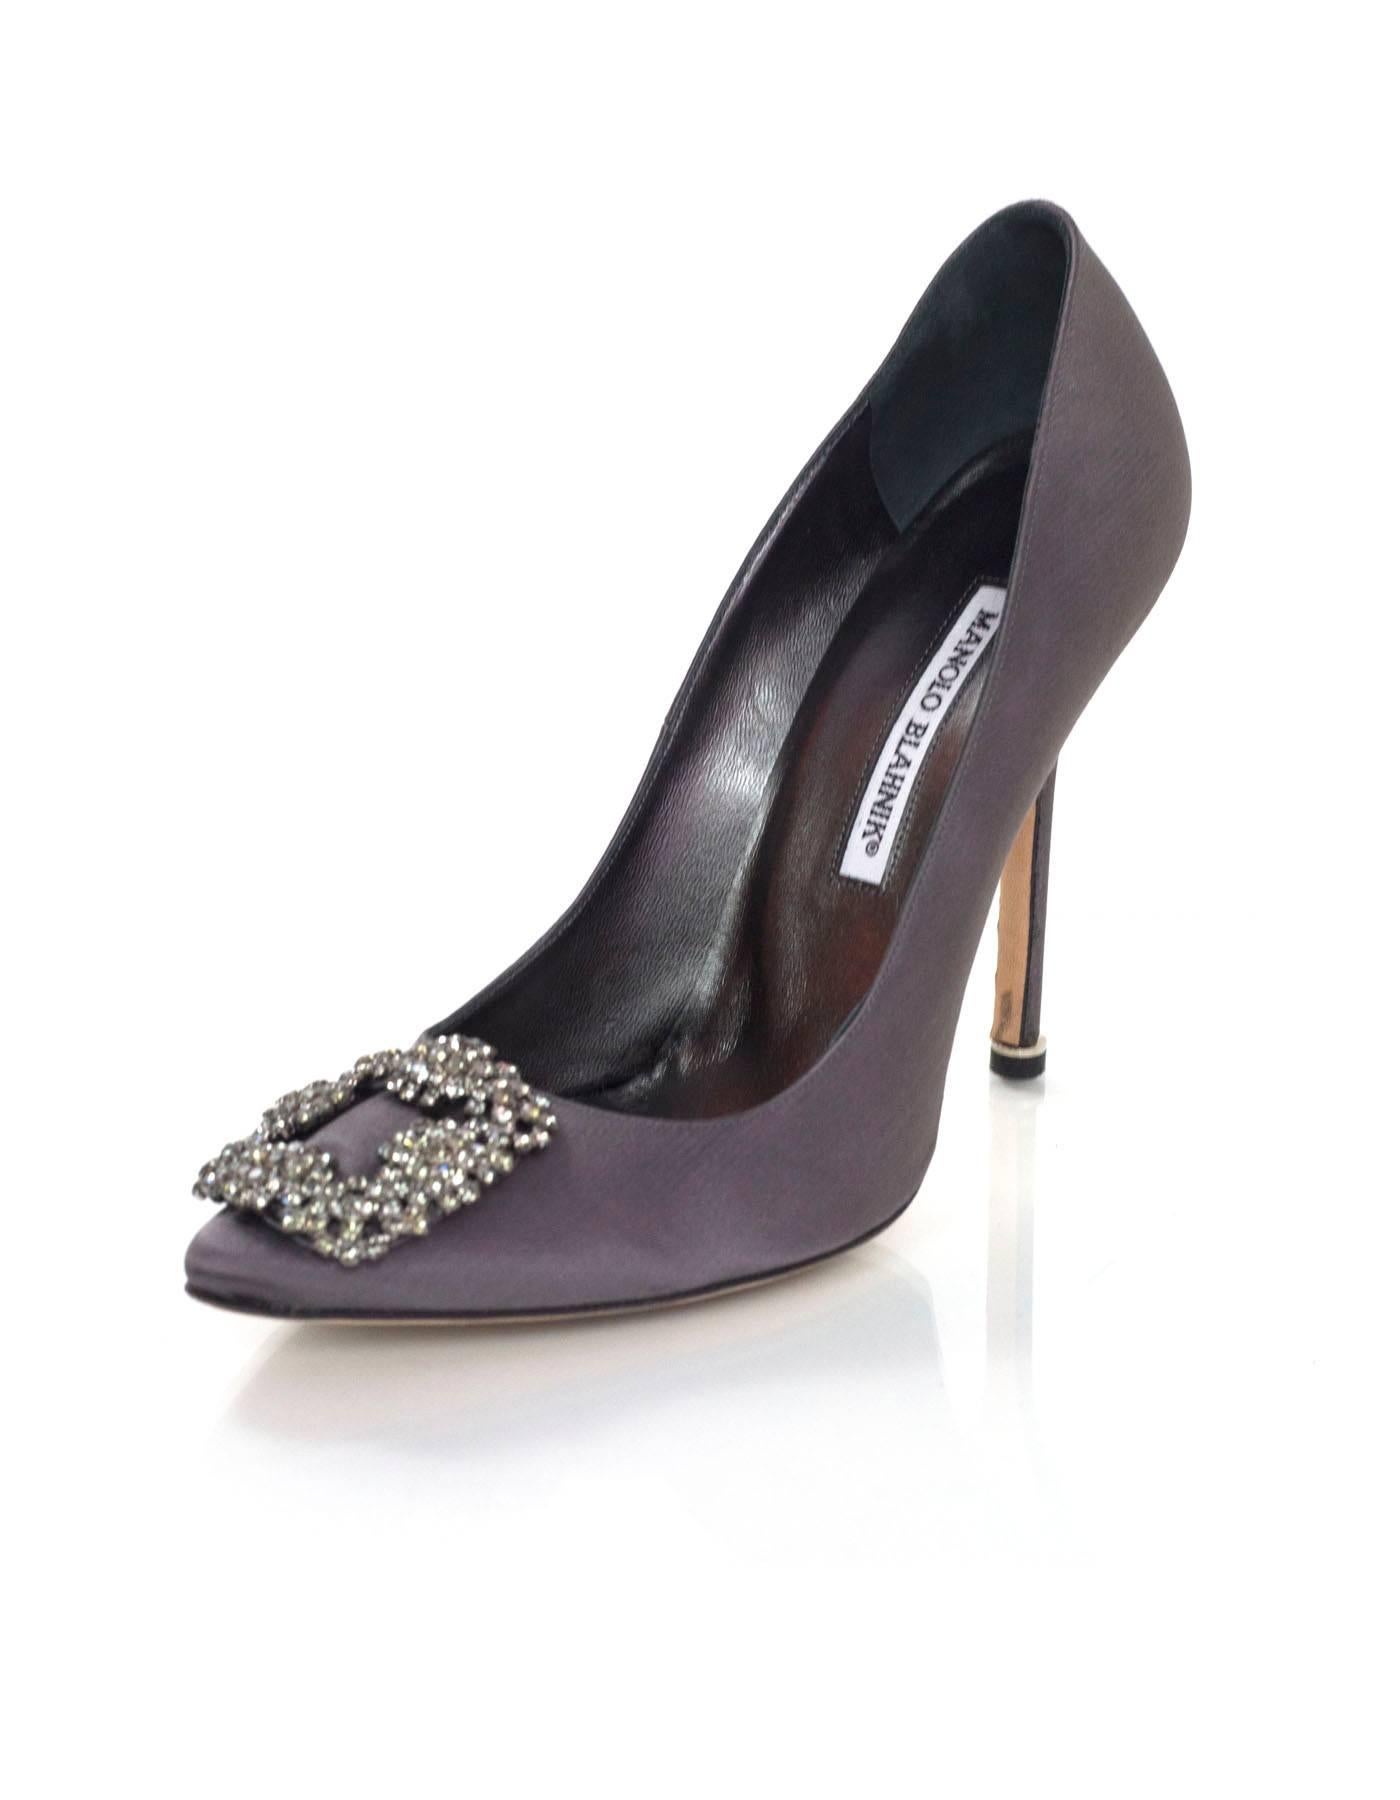 Manolo Blahnik Grey Satin Hangisi Pumps Sz 38.5

Made In: Italy
Color: Grey
Materials: Satin, crystal
Closure/Opening: Slide on
Sole Stamp: Made in Italy 38 1/2 Manolo Blahnik 
Retail Price: $965 + tax
Overall Condition: Excellent pre-owned